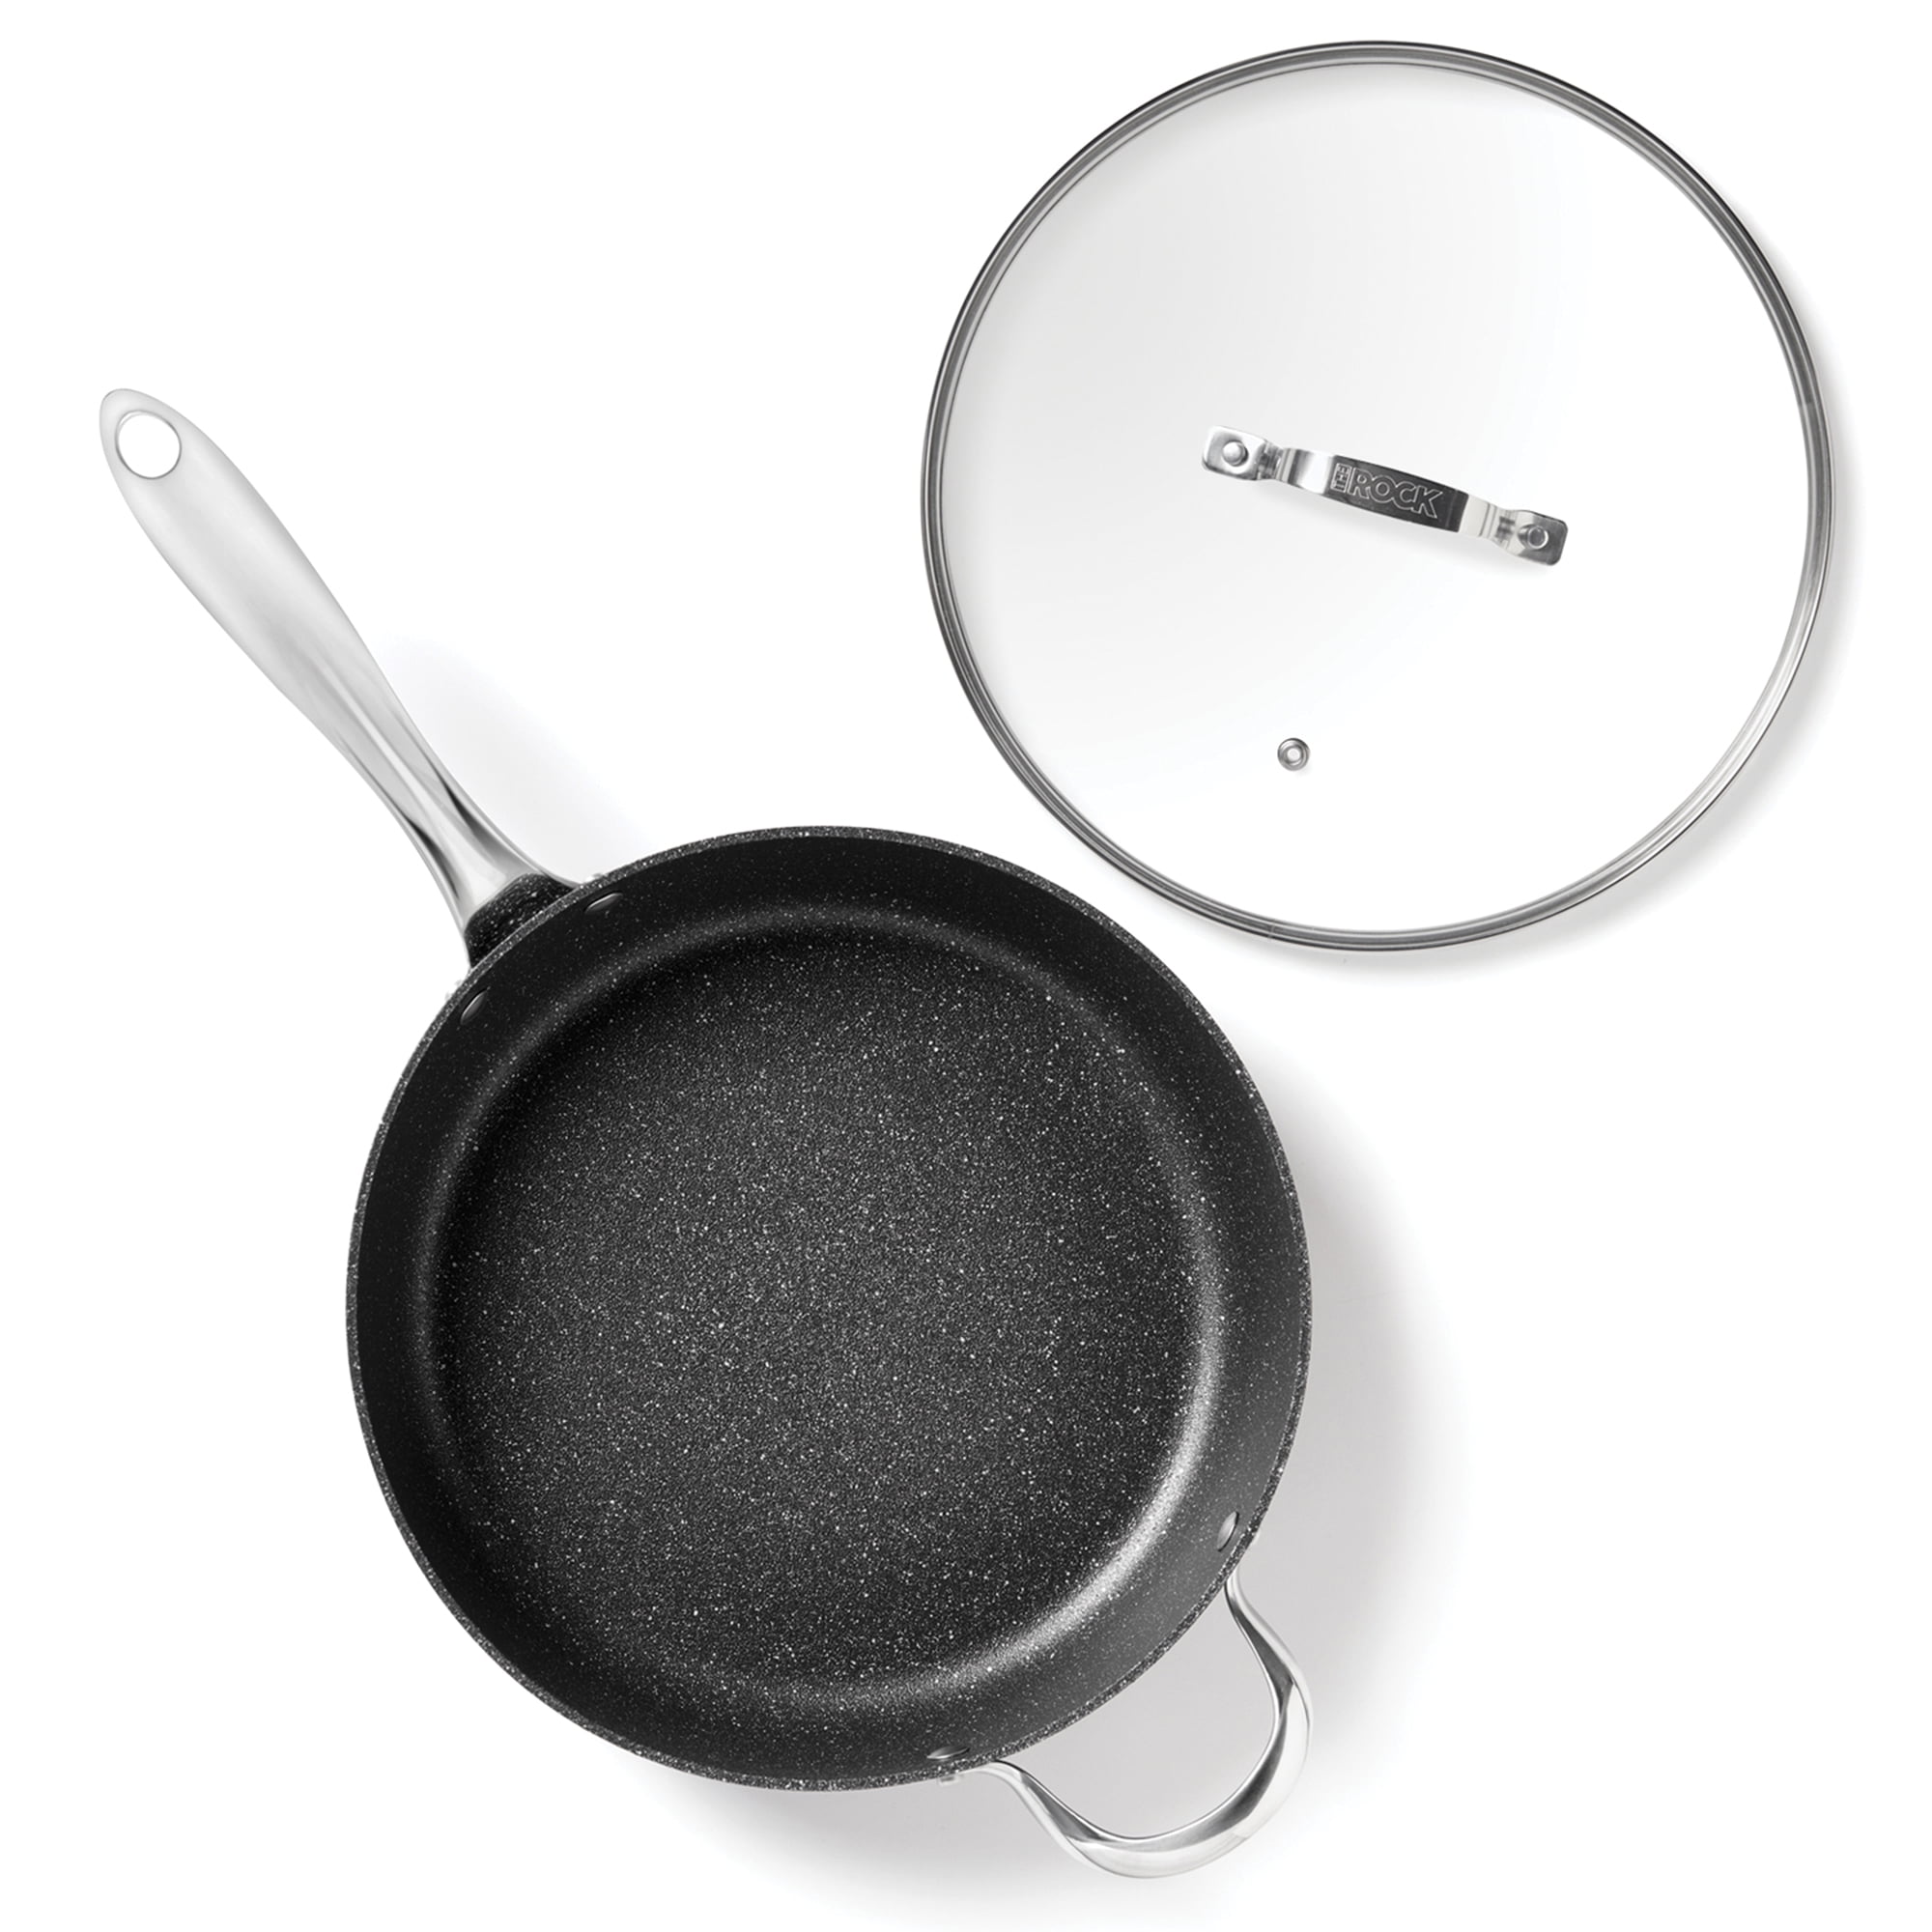 Starfrit 11 Inch Nonstick Aluminum Deep Fry Pan with Lid 2 Pieces